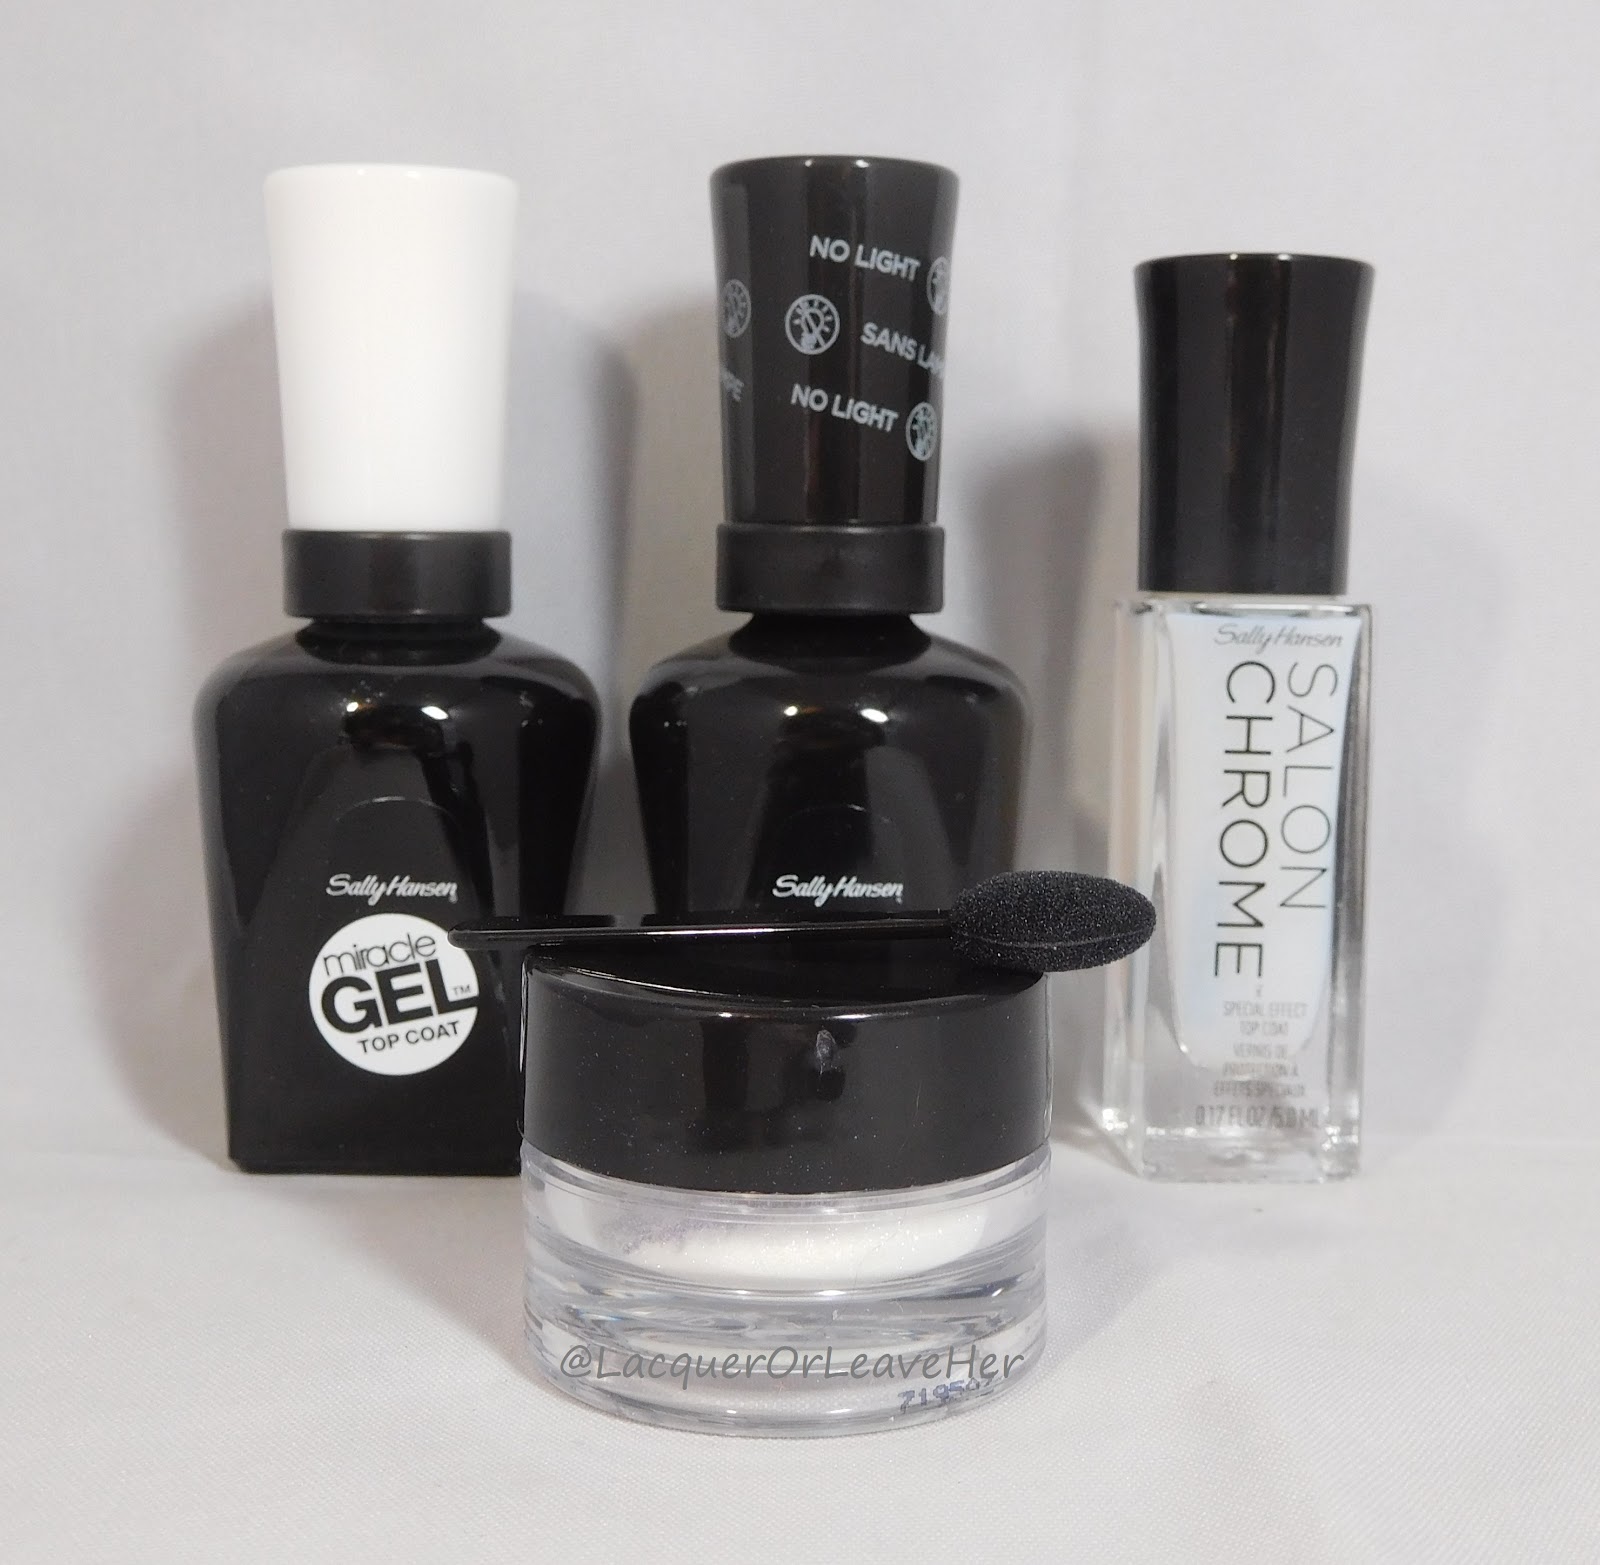 Lacquer or Leave Her!: Review: Sally Hansen Salon Chrome kit